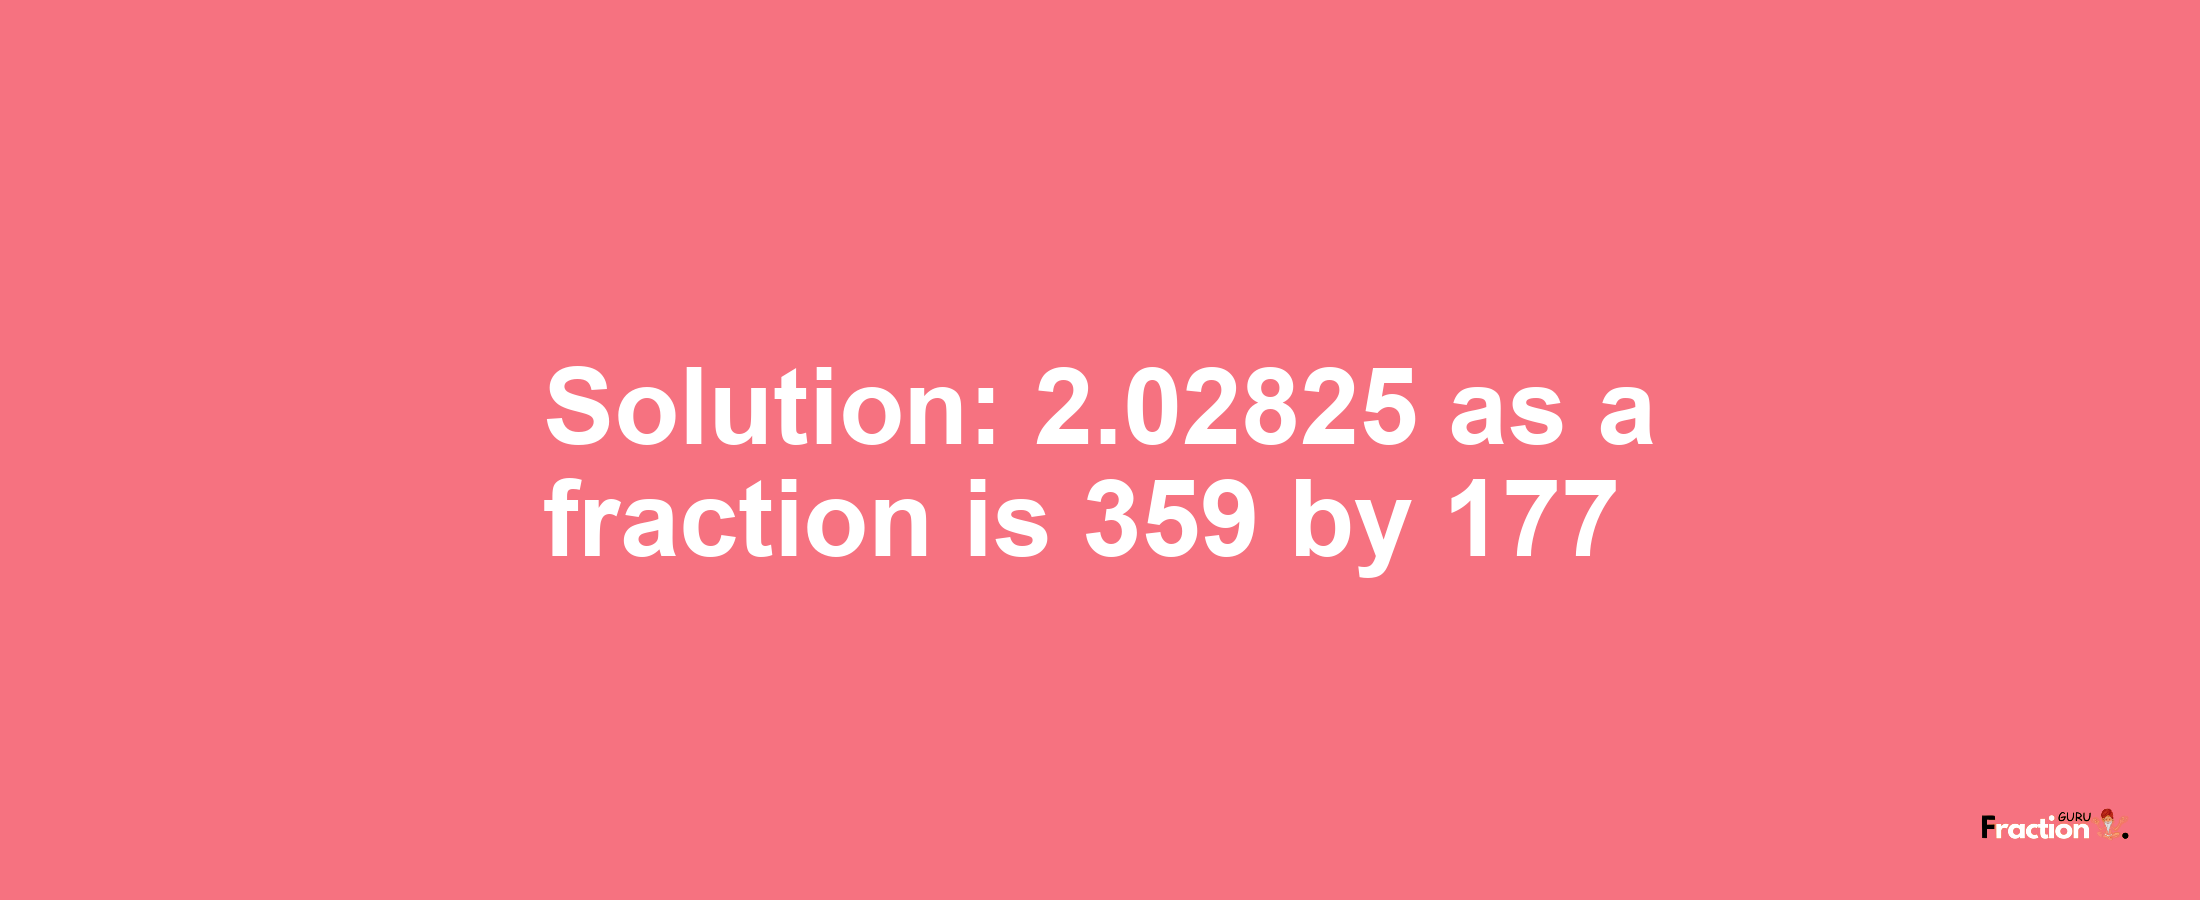 Solution:2.02825 as a fraction is 359/177